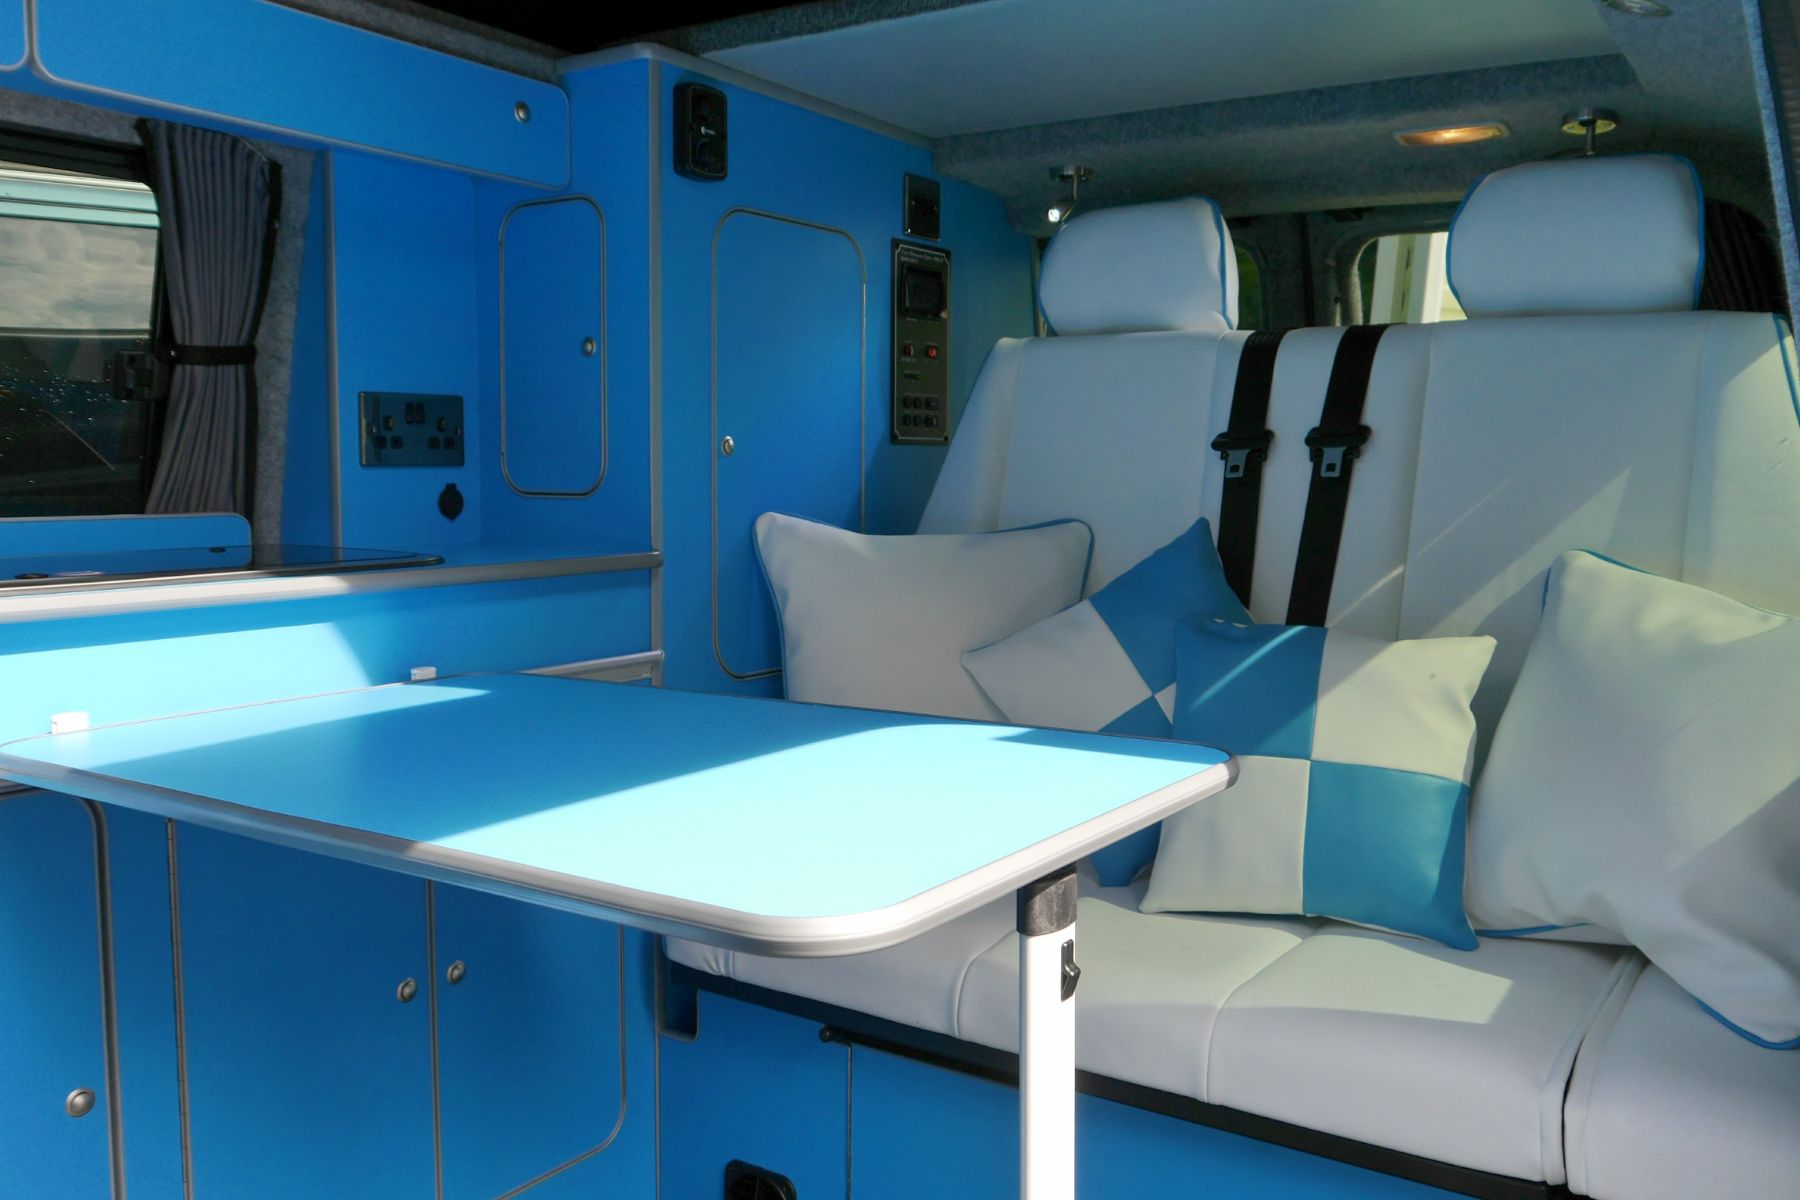 VW Caledonia blue and white interior - Sussex Campervans.JPG